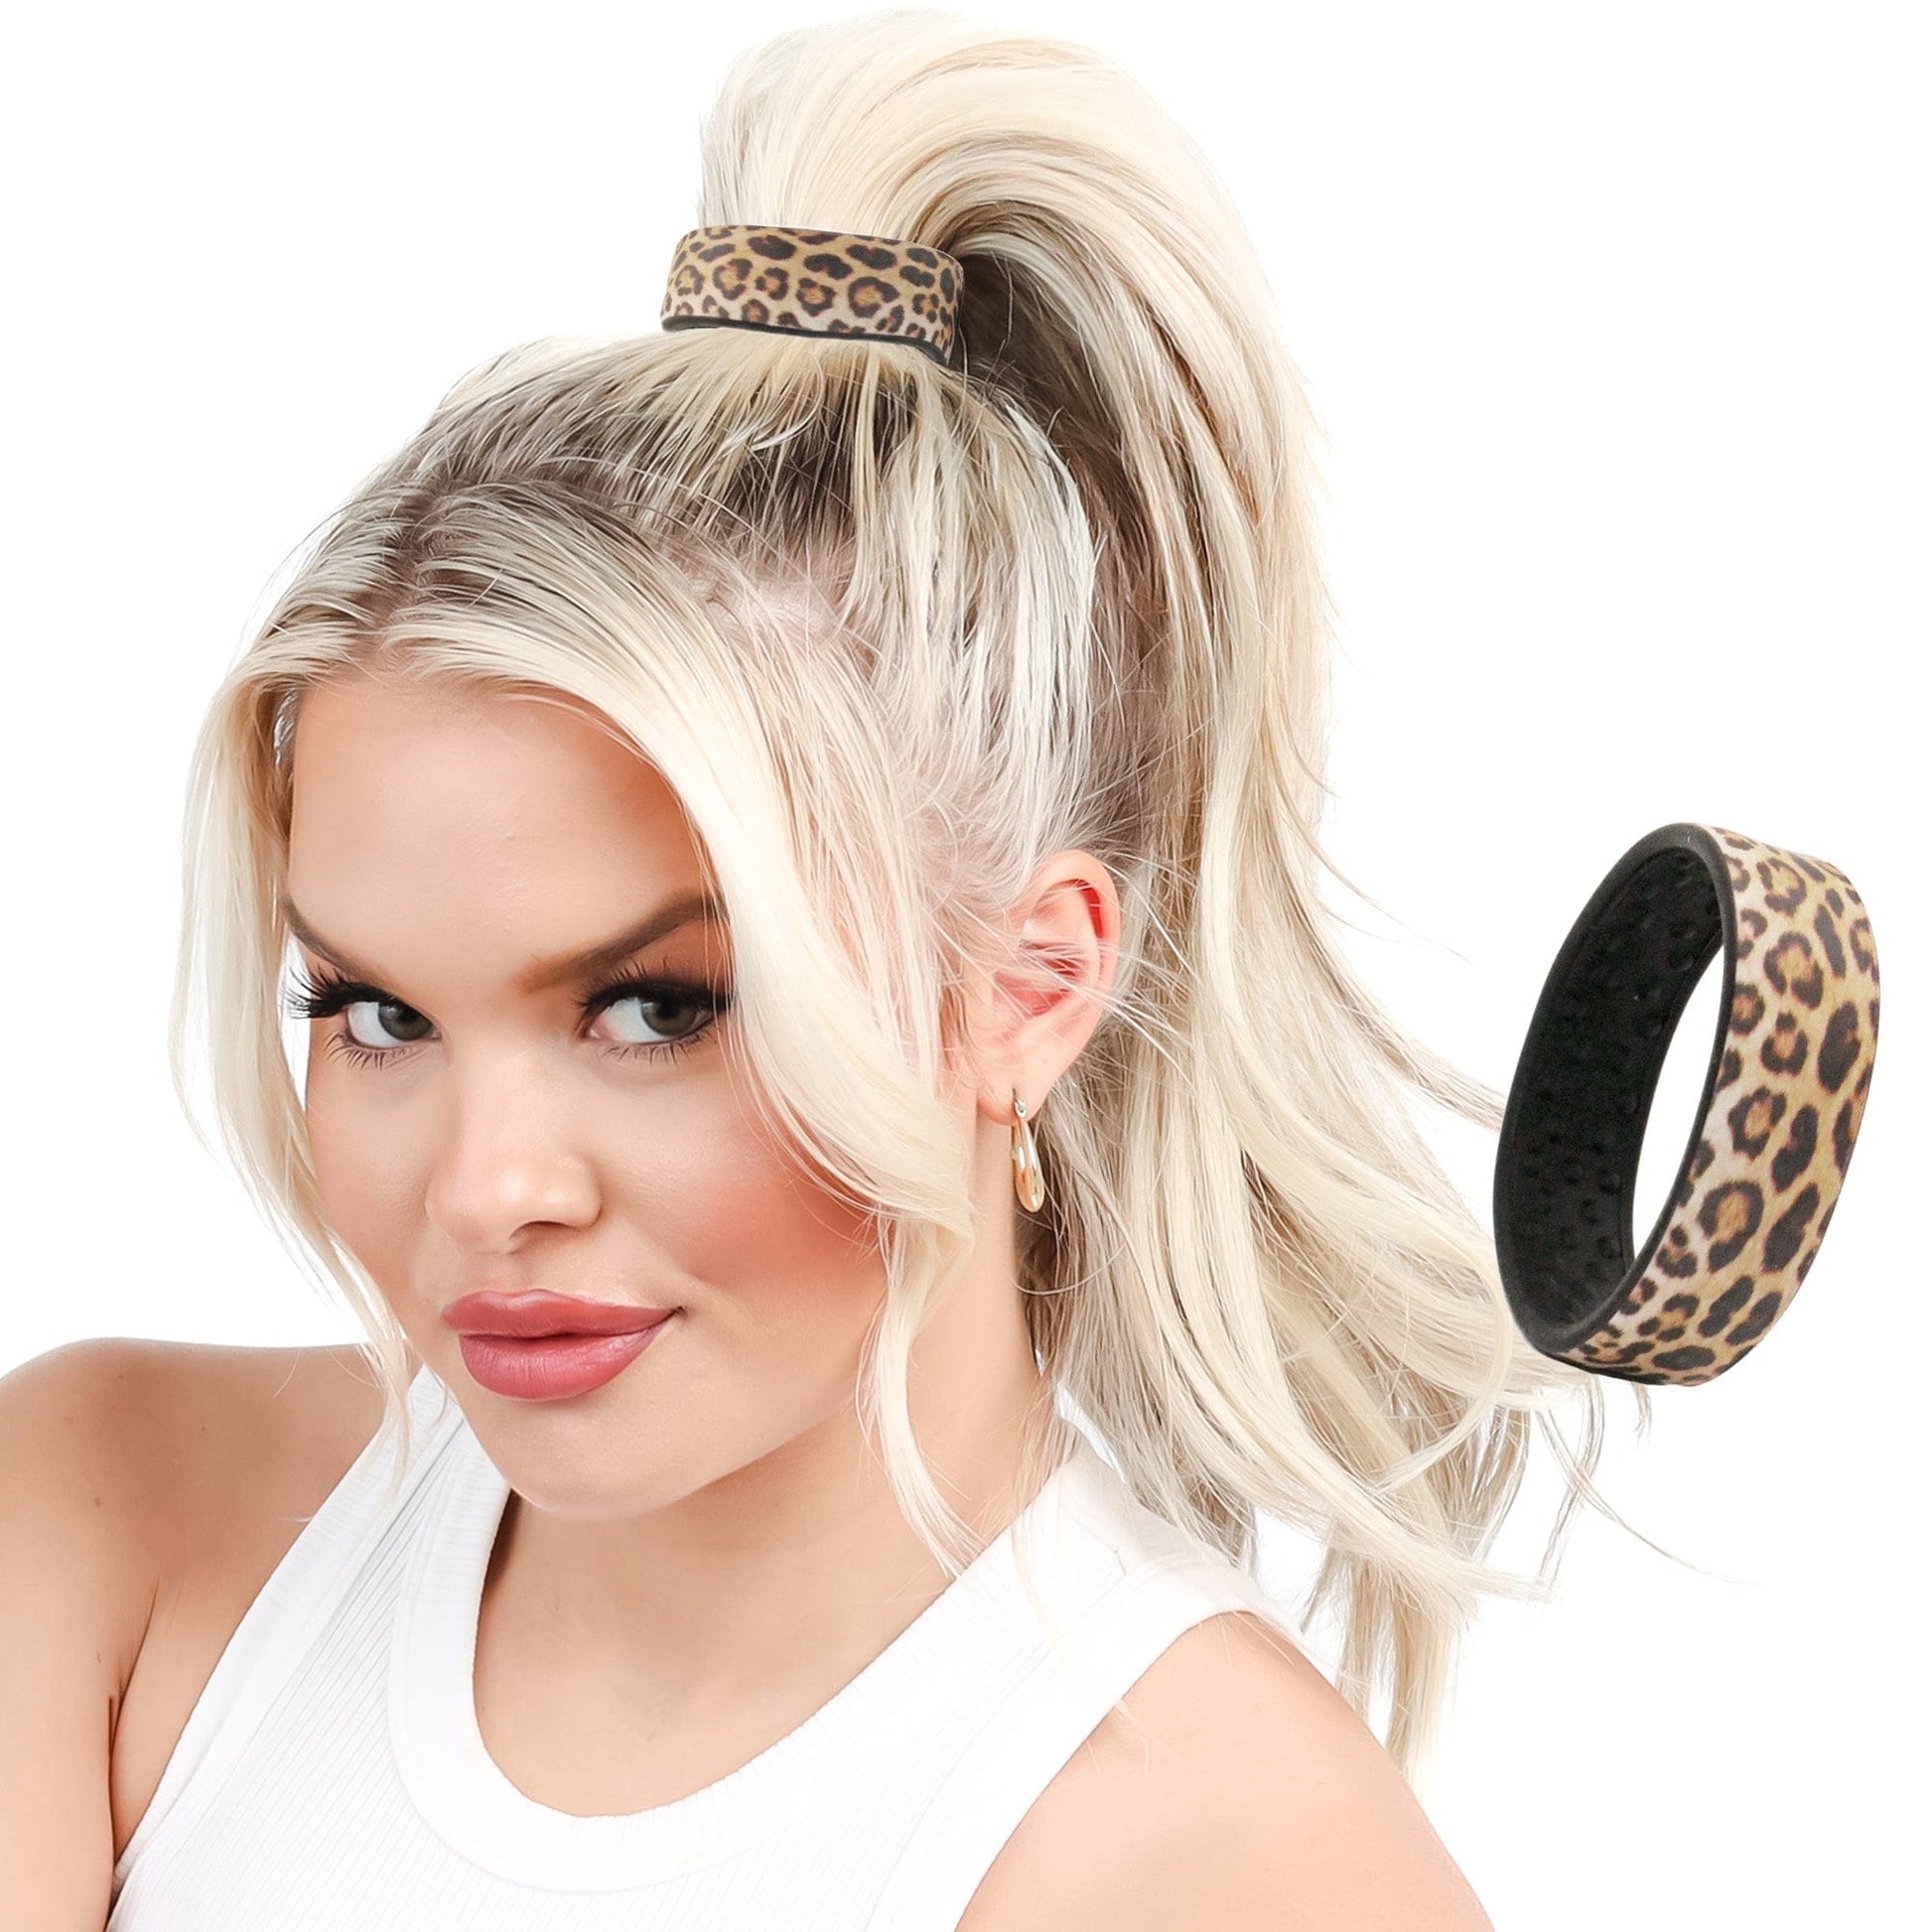 Leopard Limited Edition Designer PONY-O. This larger size is perfect for ponytails and all-up styles.